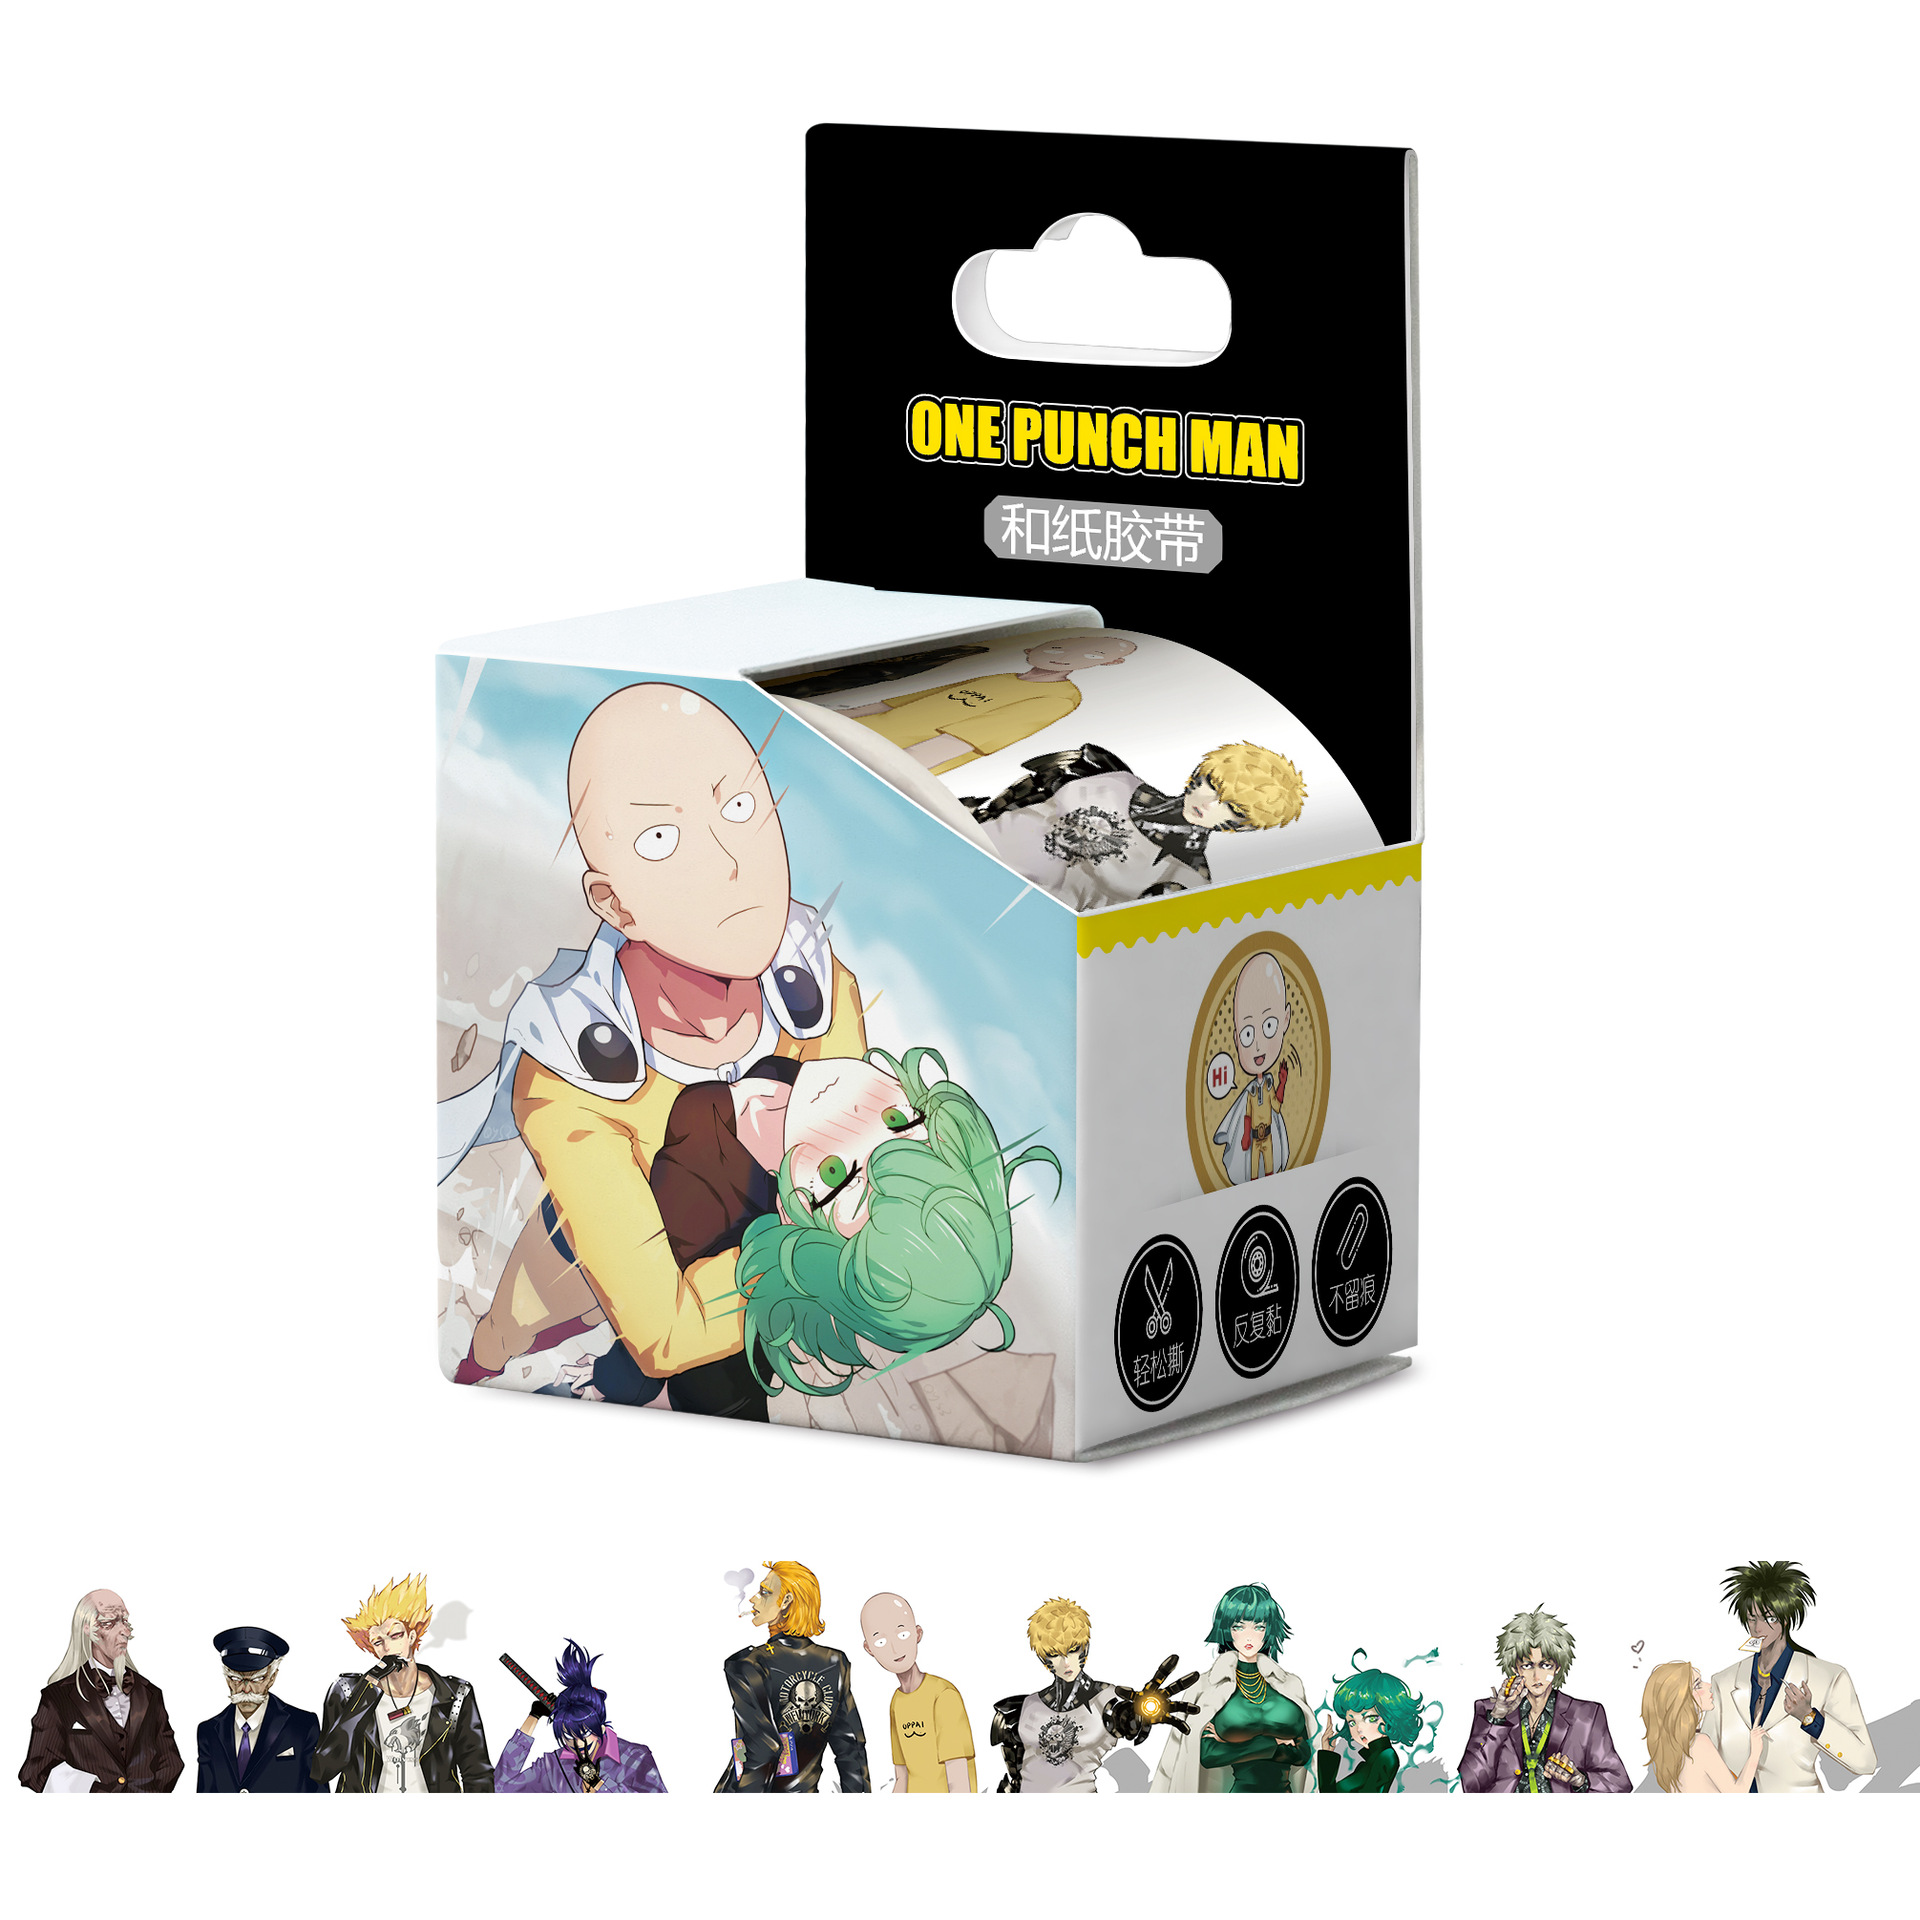 One Punch Man anime 4cm wide tape